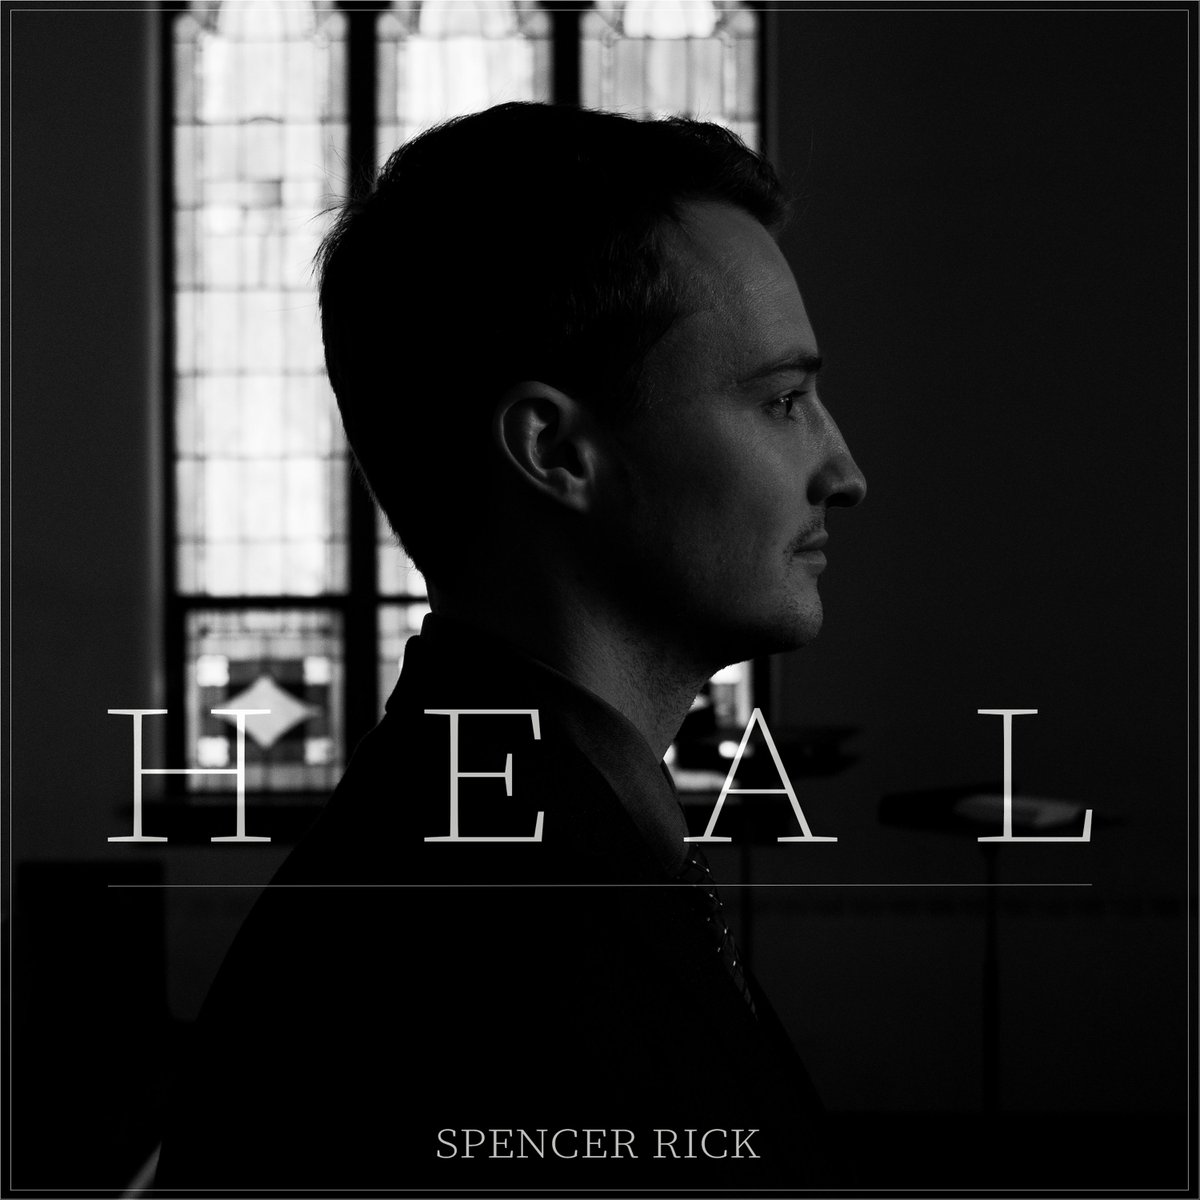 I Wrote/Recorded/Produced/MusicVideoed a new single, Heal !!!

Stream it Everywhere / Anywhere you listen to #music
lnkd.in/gwzH57Ai

THANK YOU to Alex Lioce and Jackie Luchini for helping me write/perform this #song & @Sherwood_Fam on keys!

#NewSingle #NewMusicFriday